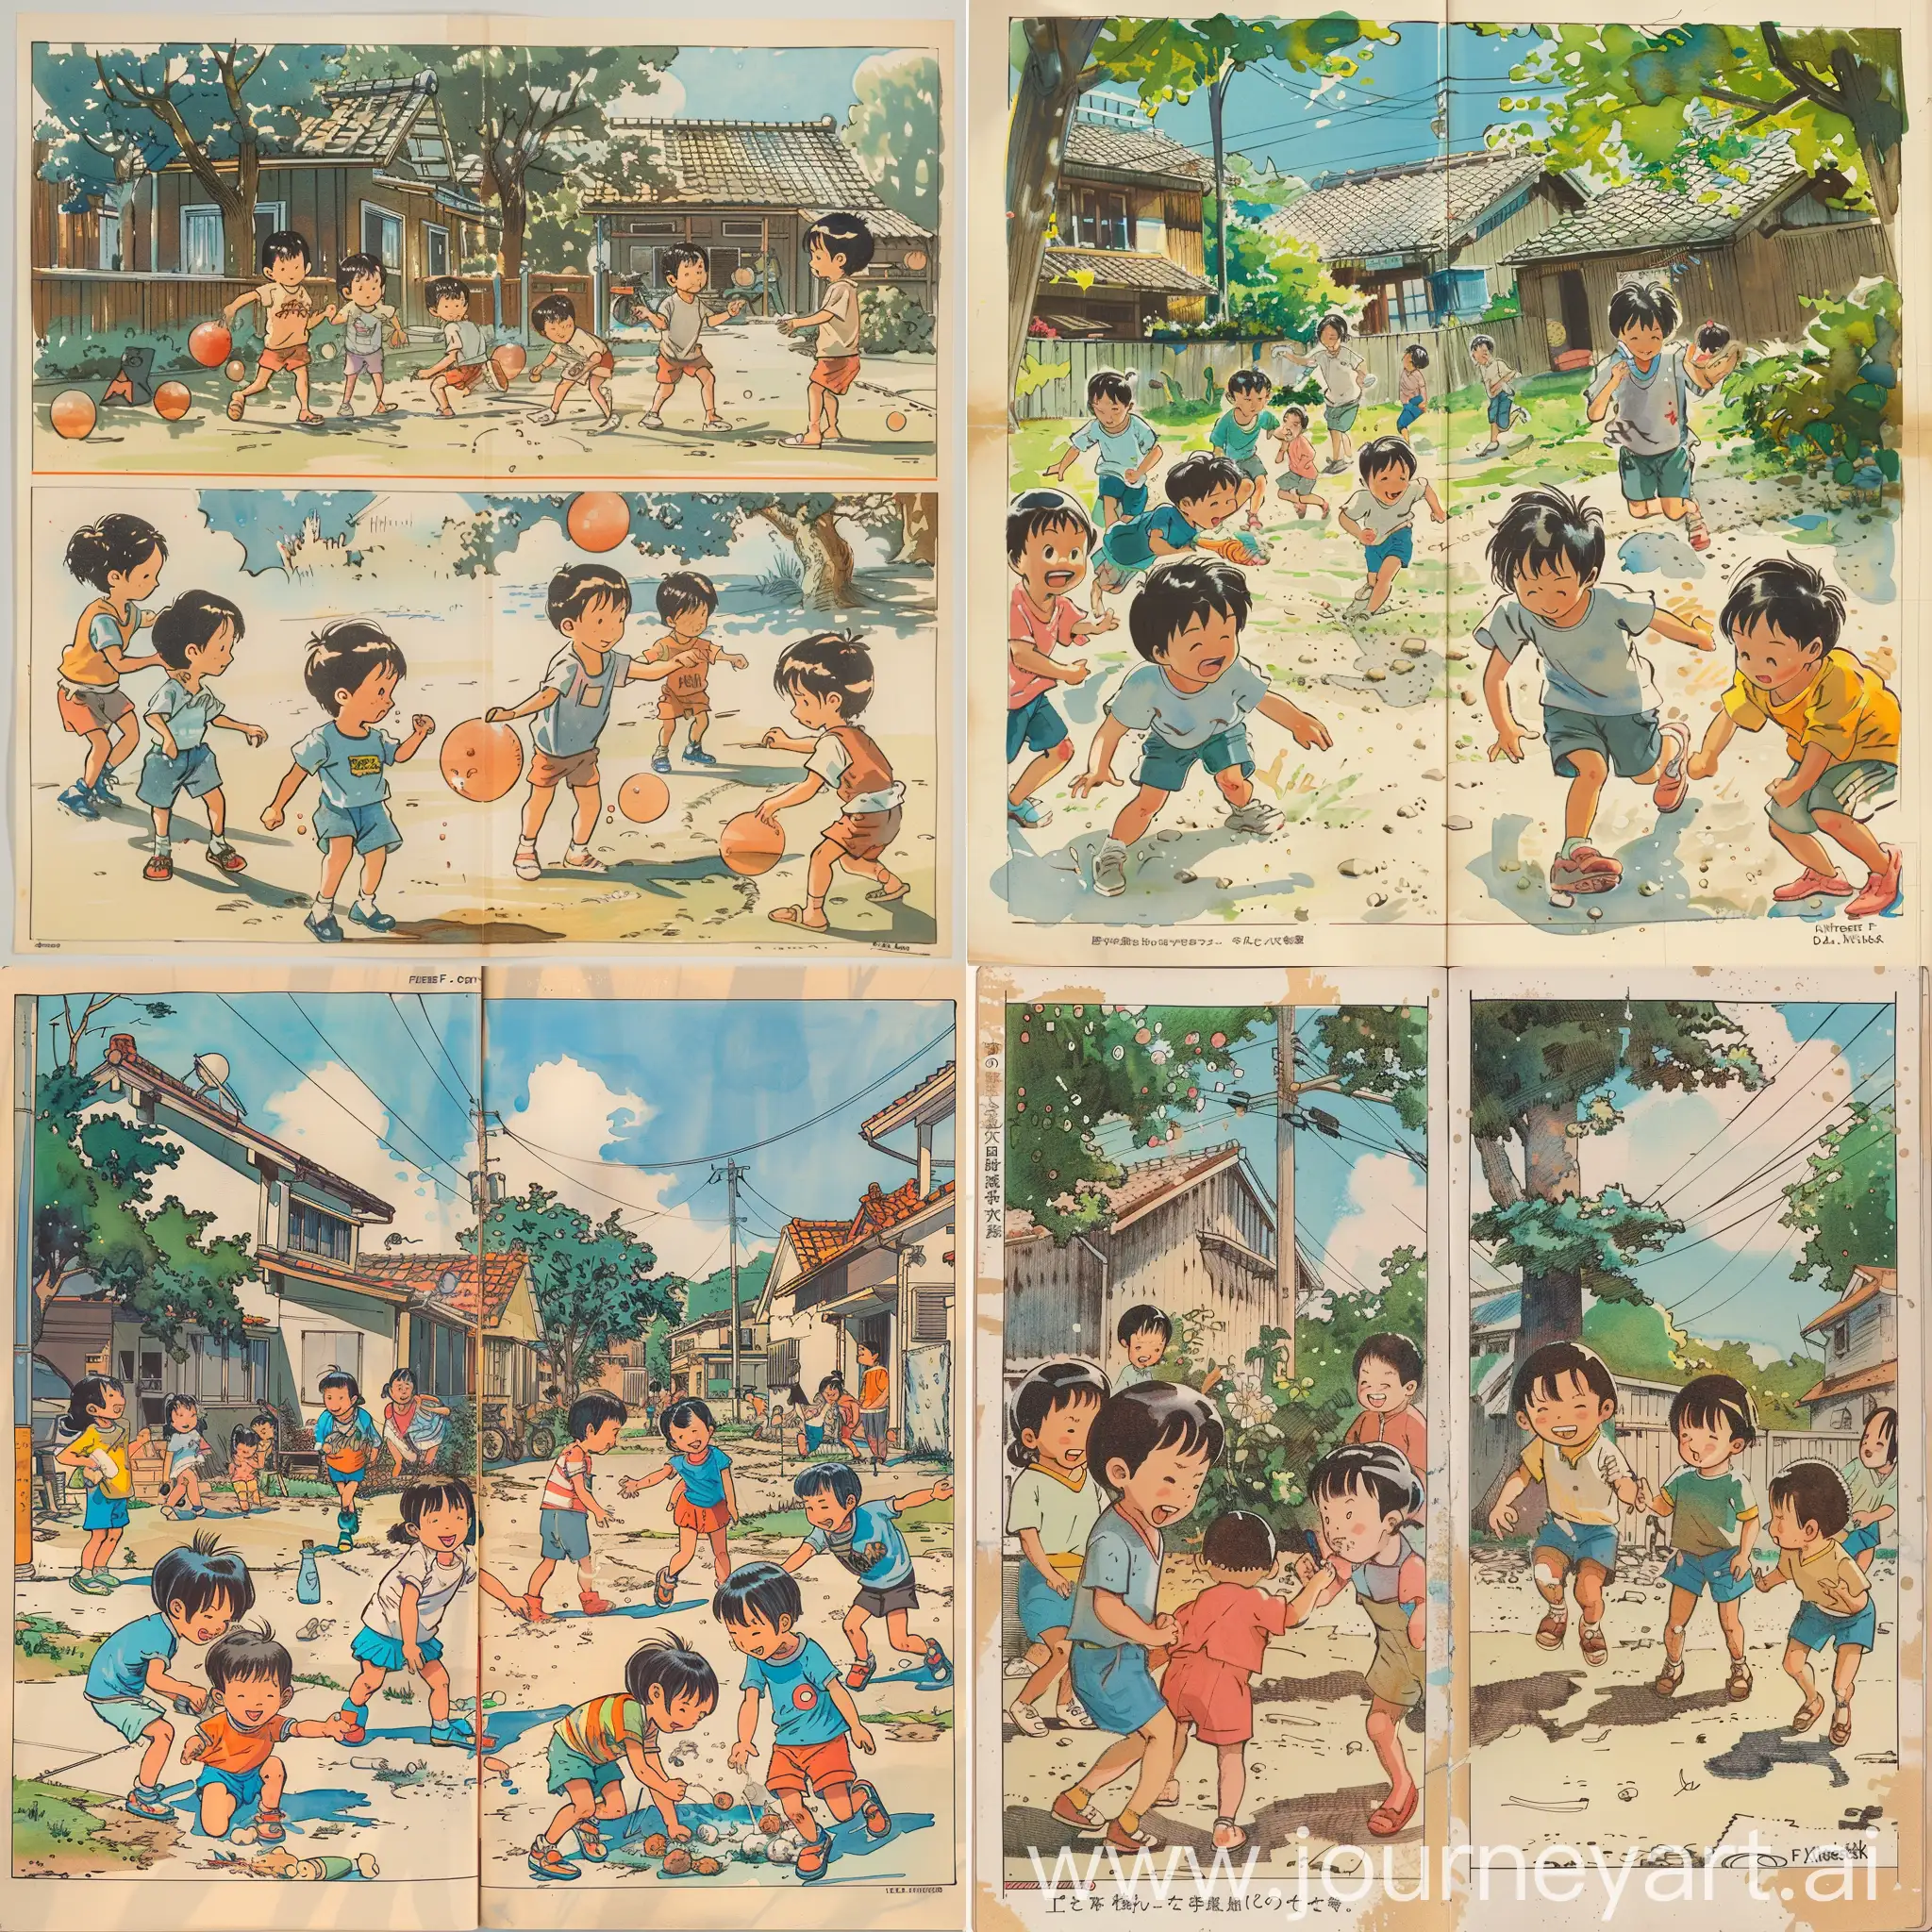 A two-page spread illustration from the obscure 1980s shōjo manga Kiteretsu Daihyakka, capturing a lively scene of neighborhood children playing together outside on a sunny afternoon. Rendered in Fujio F. Fujiko's iconic cartoonish stylings, with his signature emphasis on exaggerated and emotive facial expressions. Inspired equally by the slapstick hijinks of Doraemon and laidback realism seen in such works as Obake no Q-tarō. Rich atmospheric shading and backgrounds evoke the carefree days of summer vacation through a nostalgic lens.
